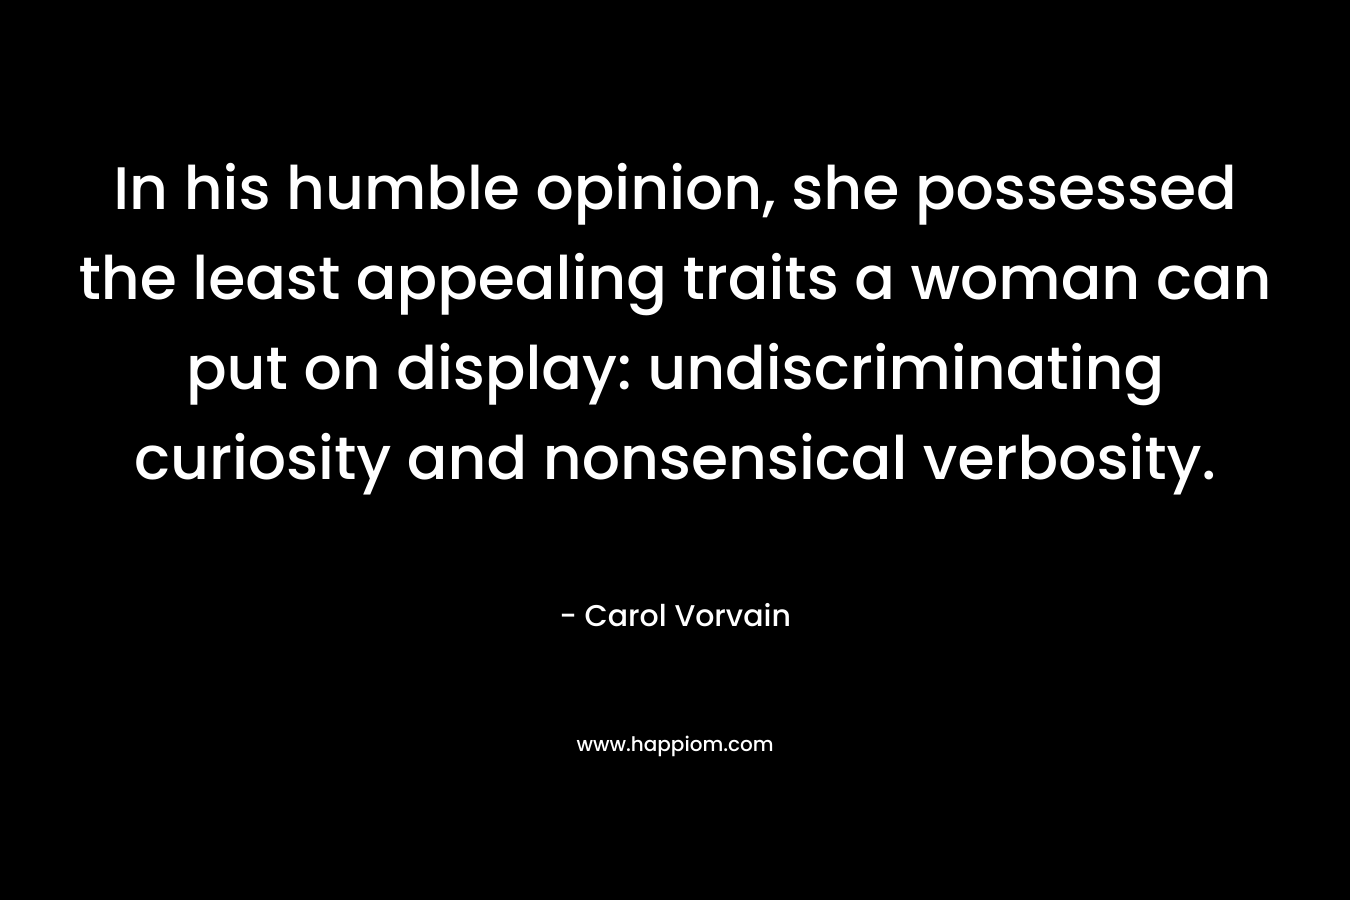 In his humble opinion, she possessed the least appealing traits a woman can put on display: undiscriminating curiosity and nonsensical verbosity. – Carol Vorvain